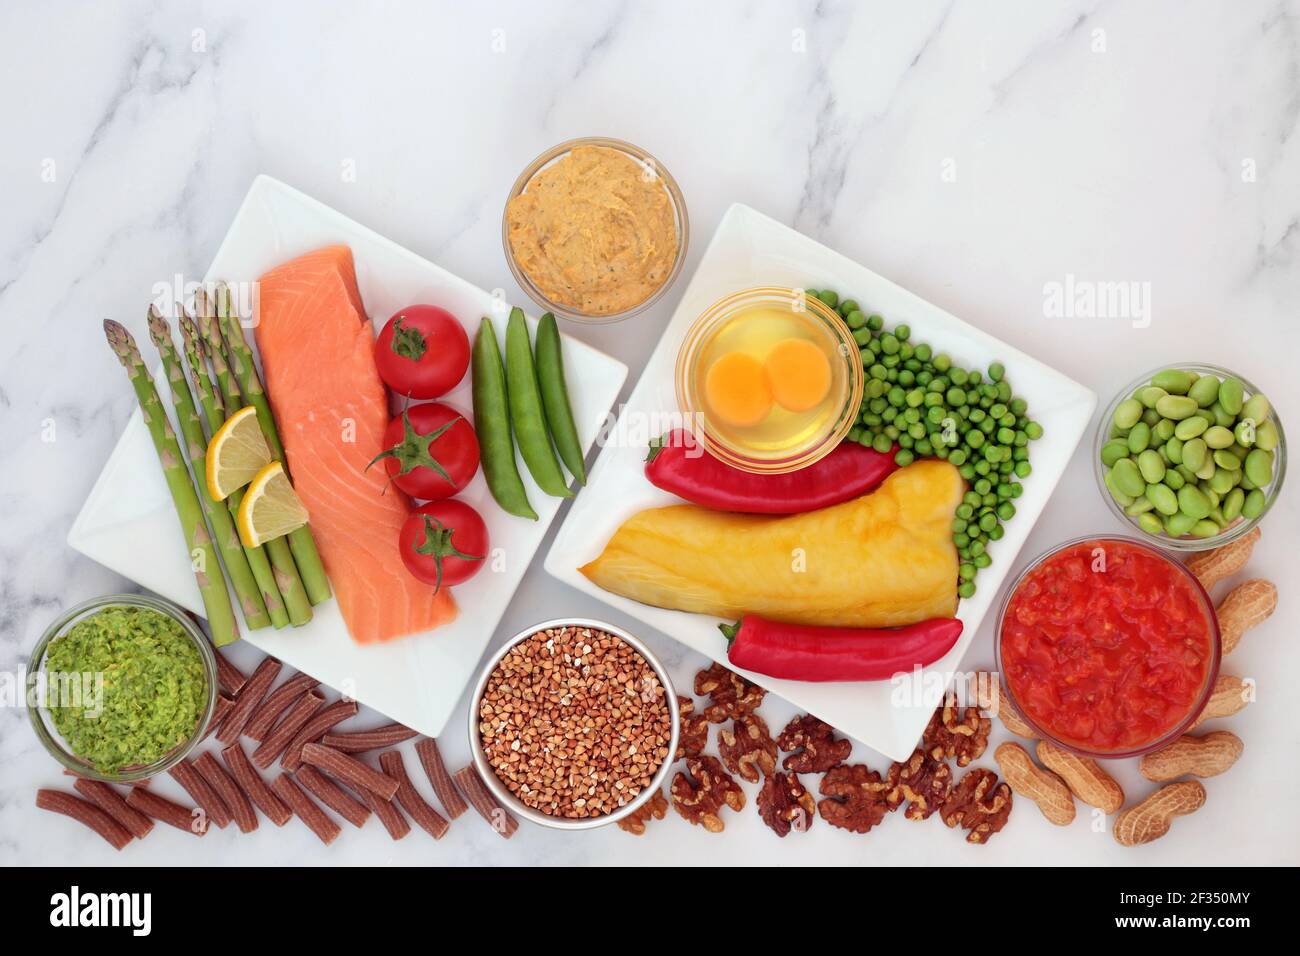 Low glycemic food for diabetics for a healthy diet with vegetables, seafood, grains, dairy, nuts,pasta & dips. All foods below 55 on the GI scale. Stock Photo